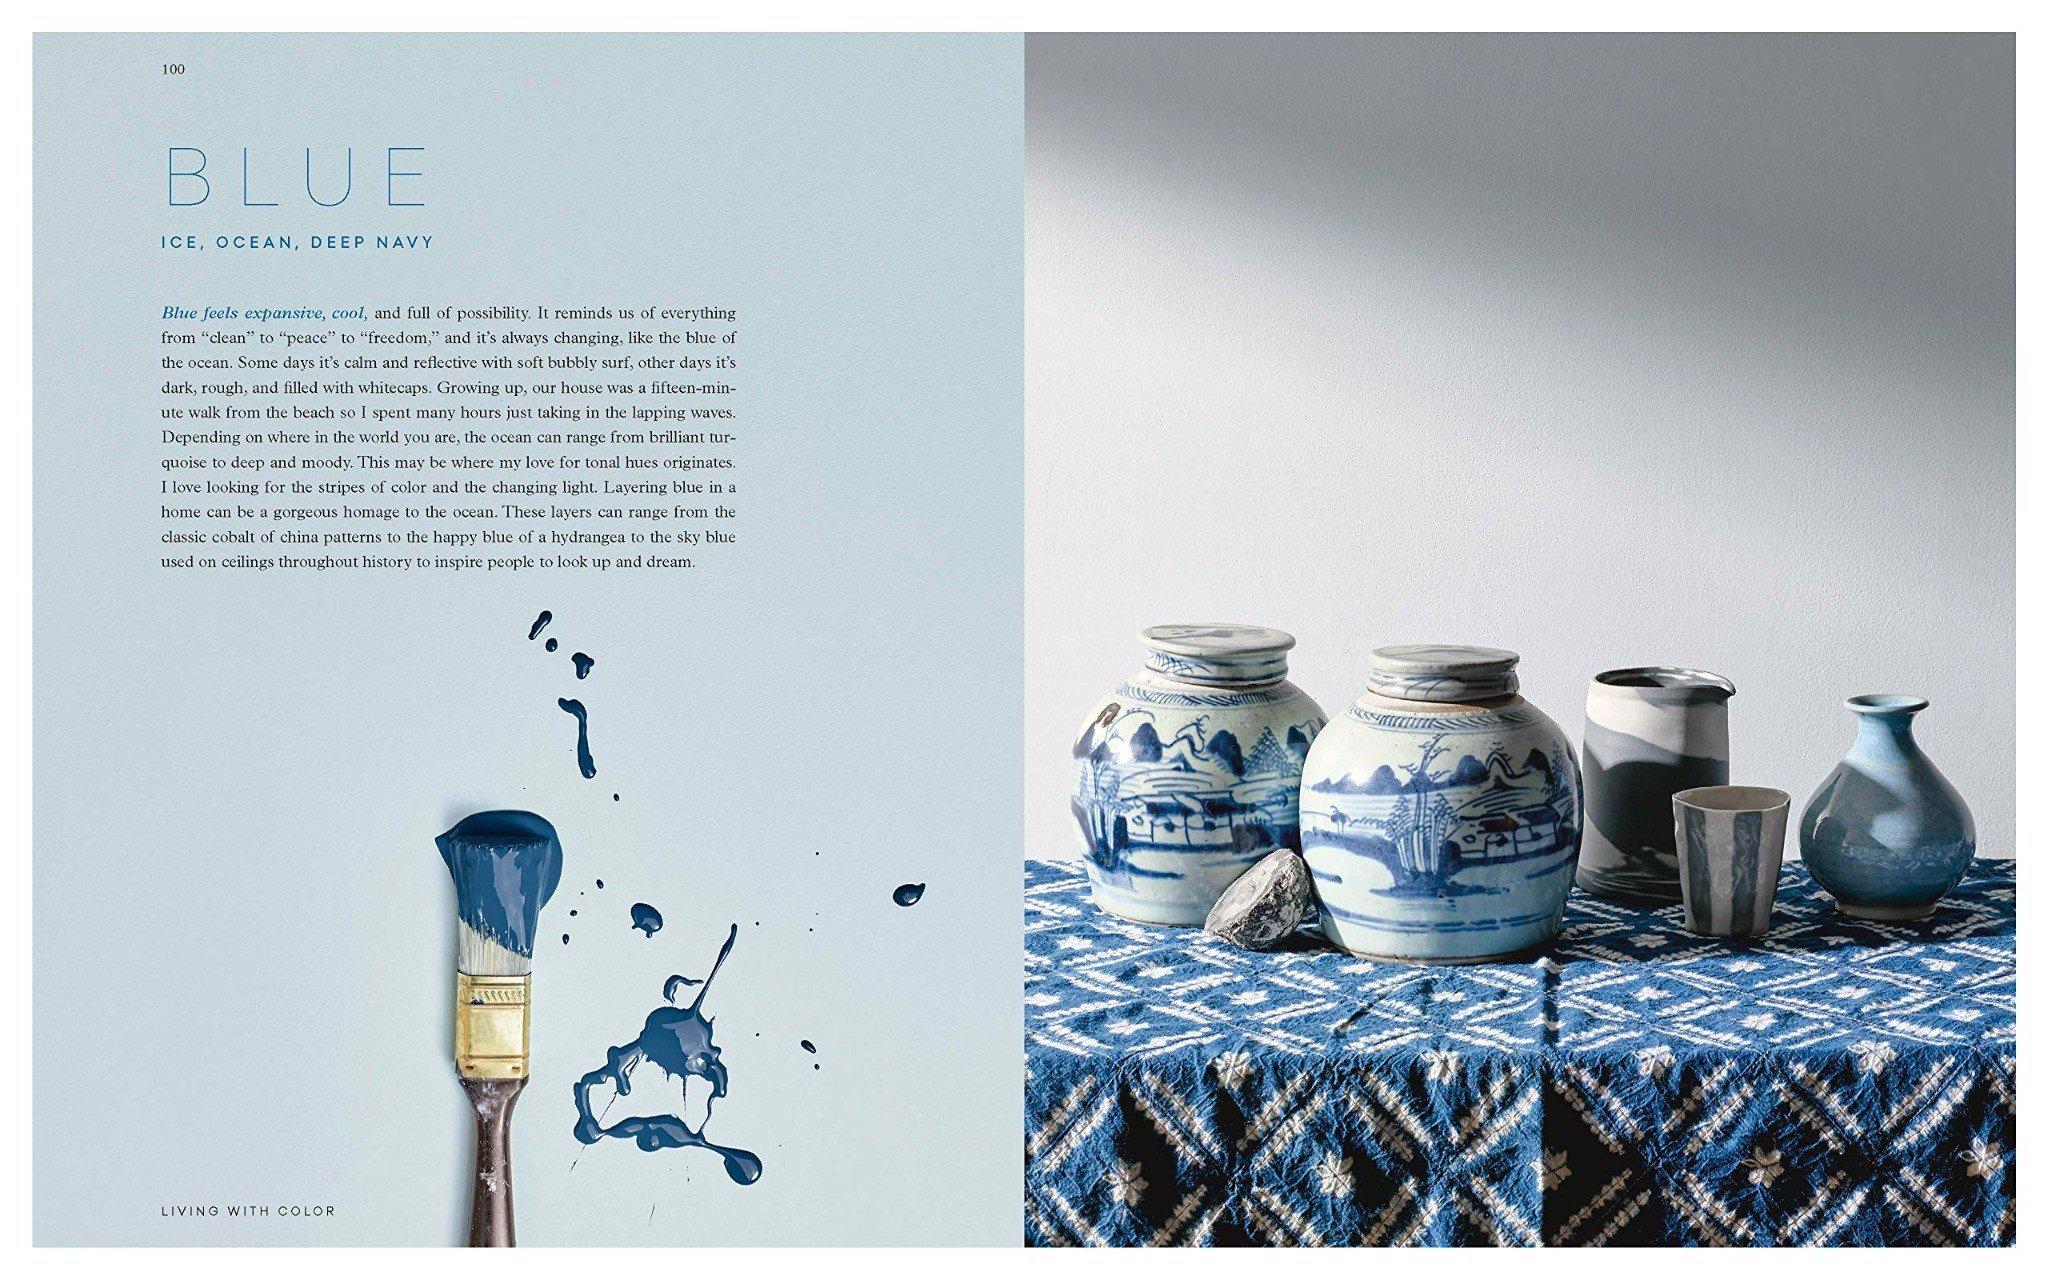 Artbook - Sách Tiếng Anh - Living With Color